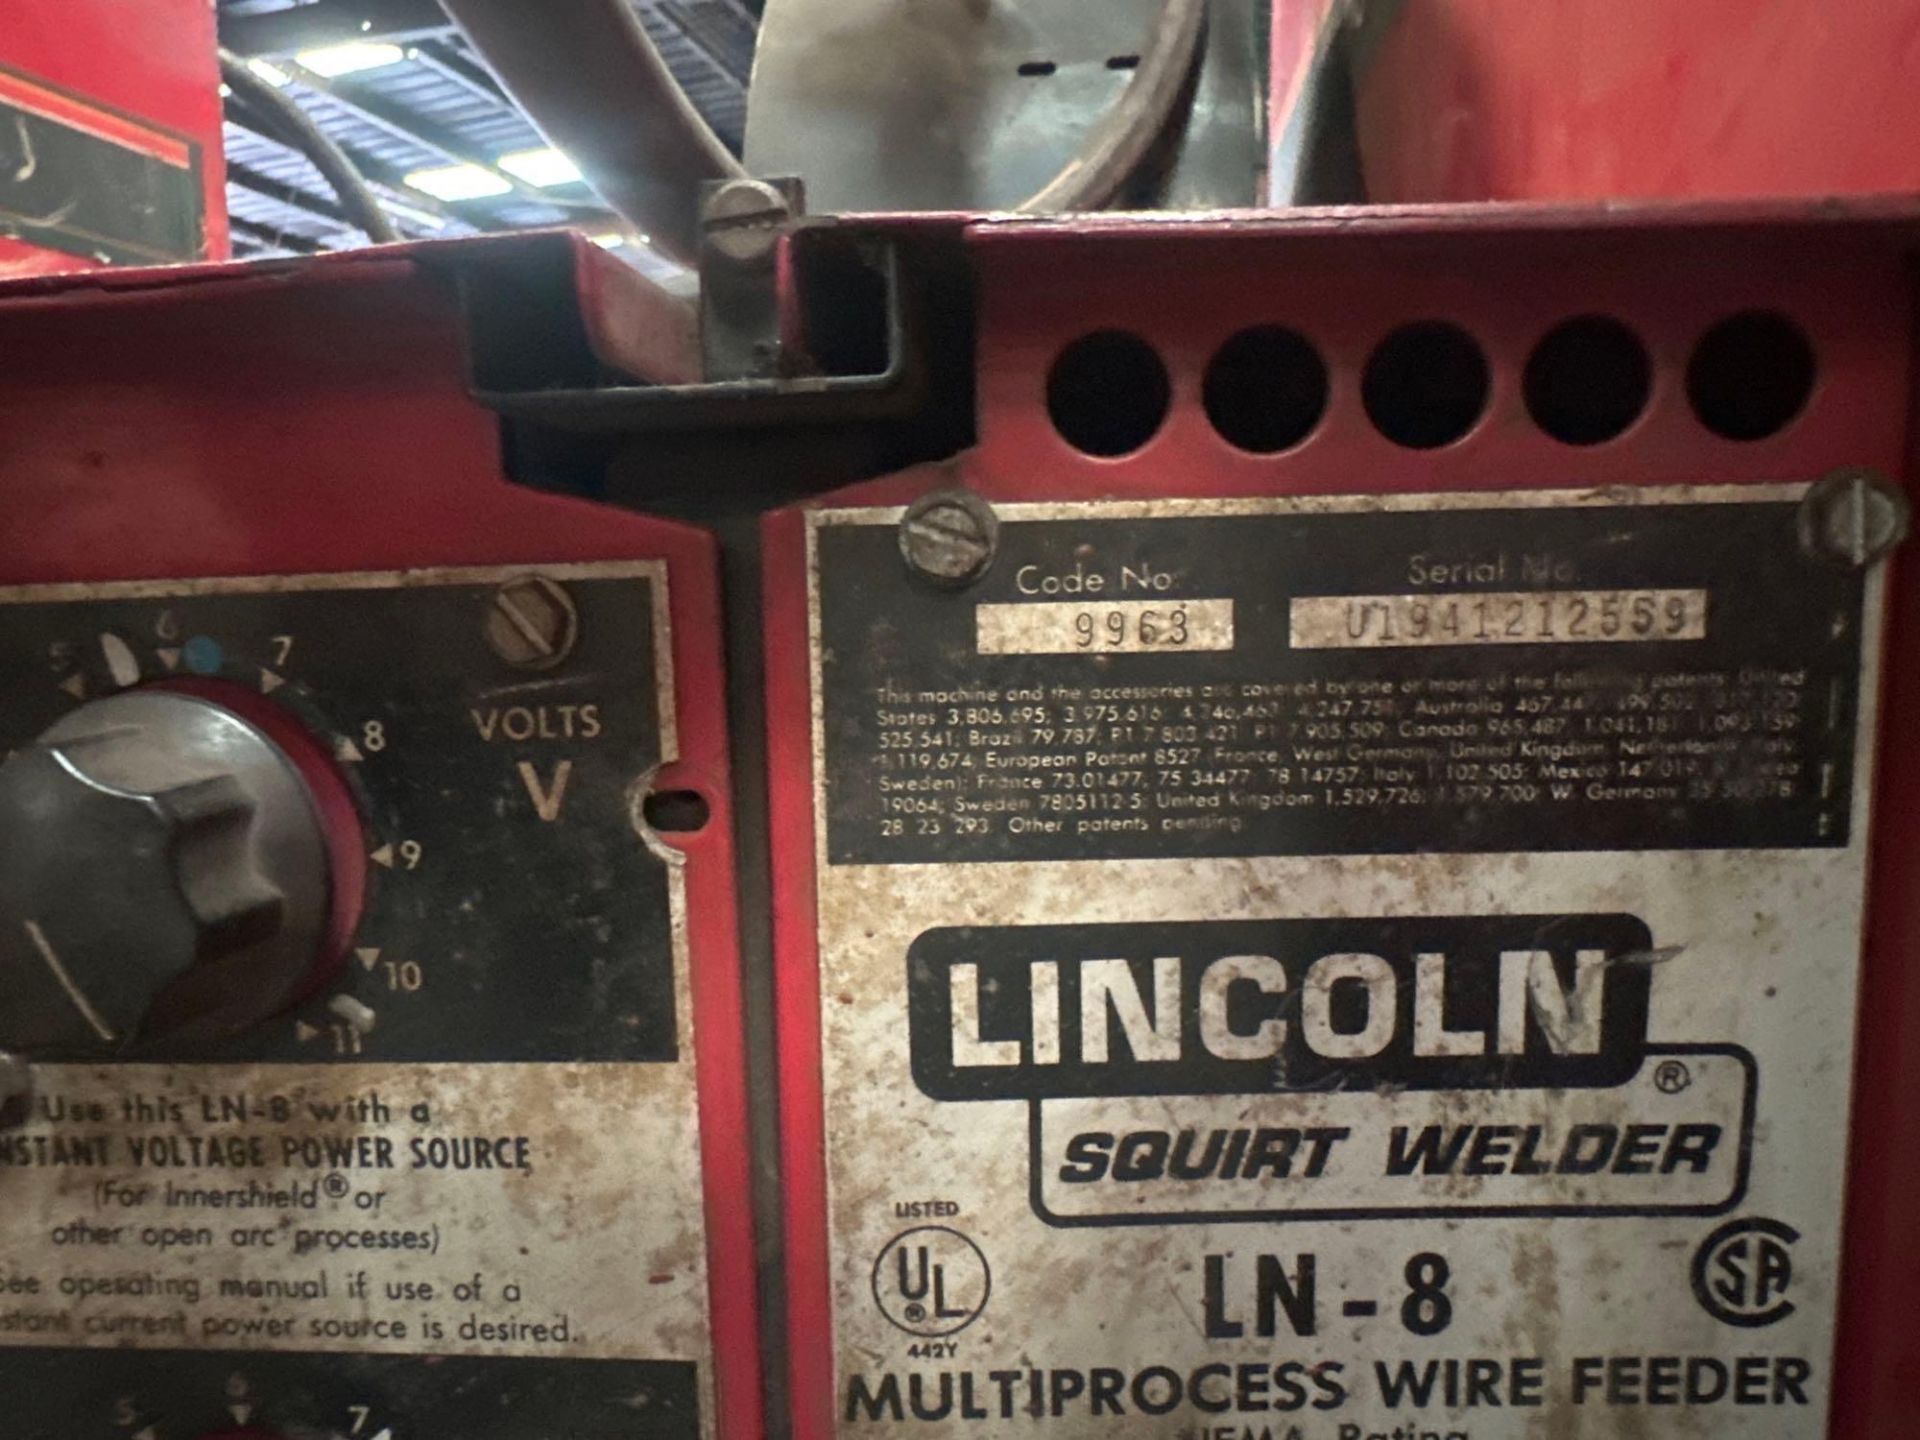 Lincoln Electric DC-600Welder, s/n U 1020461387 w/ Lincoln Squirt Welder LN-8Wire Feeder - Image 10 of 10